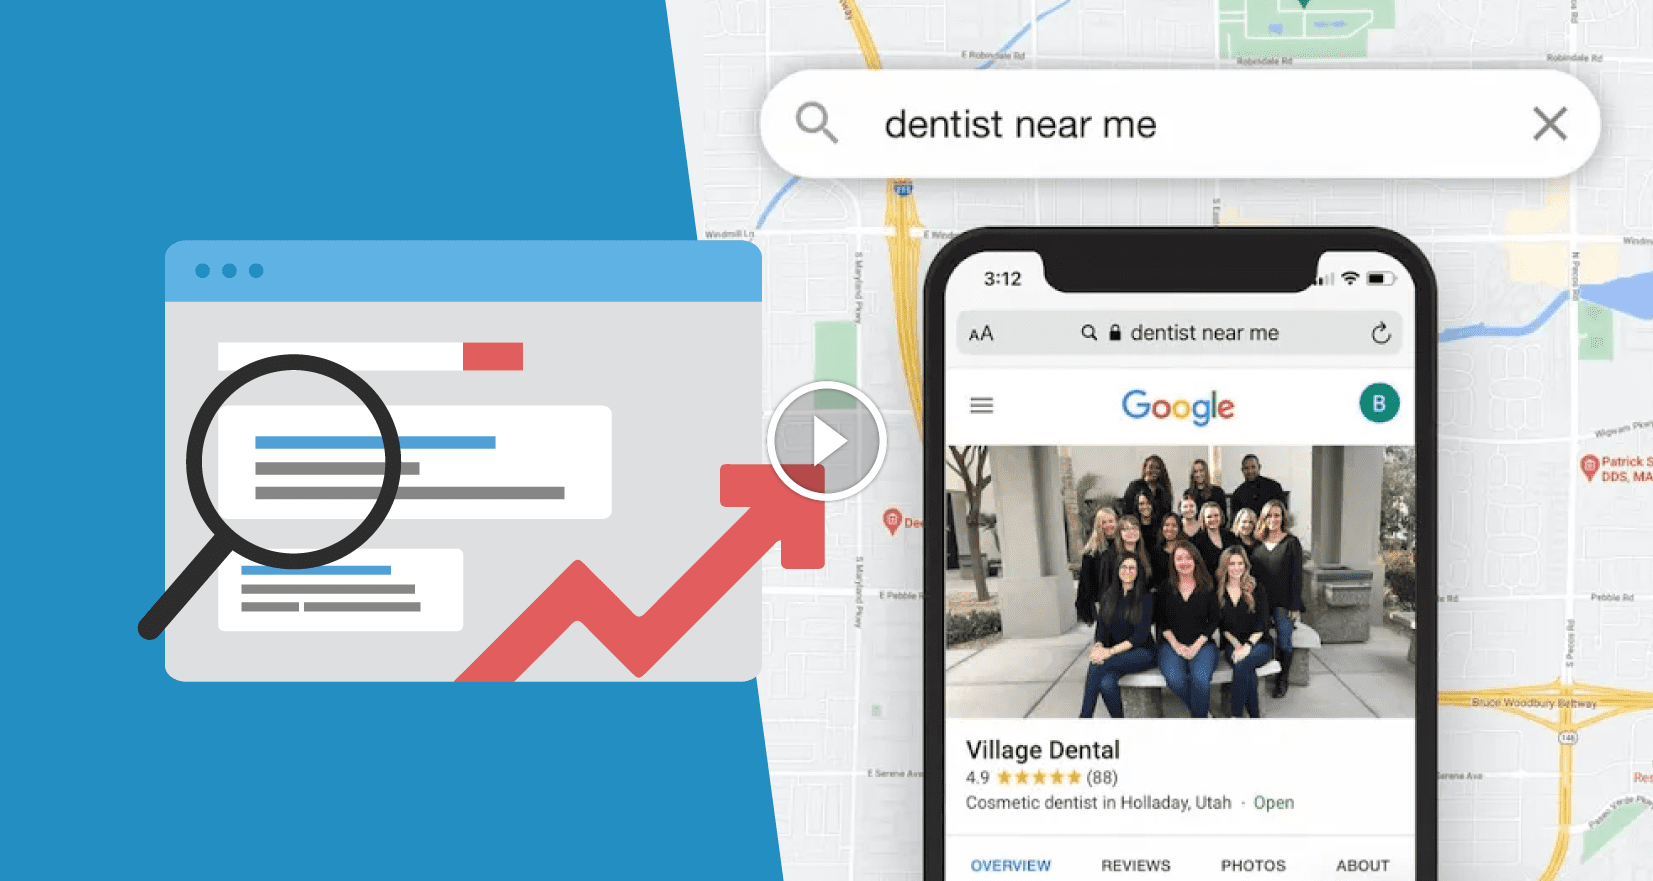 Dental Consultant SEO Tips to Rank High in Search [Video]